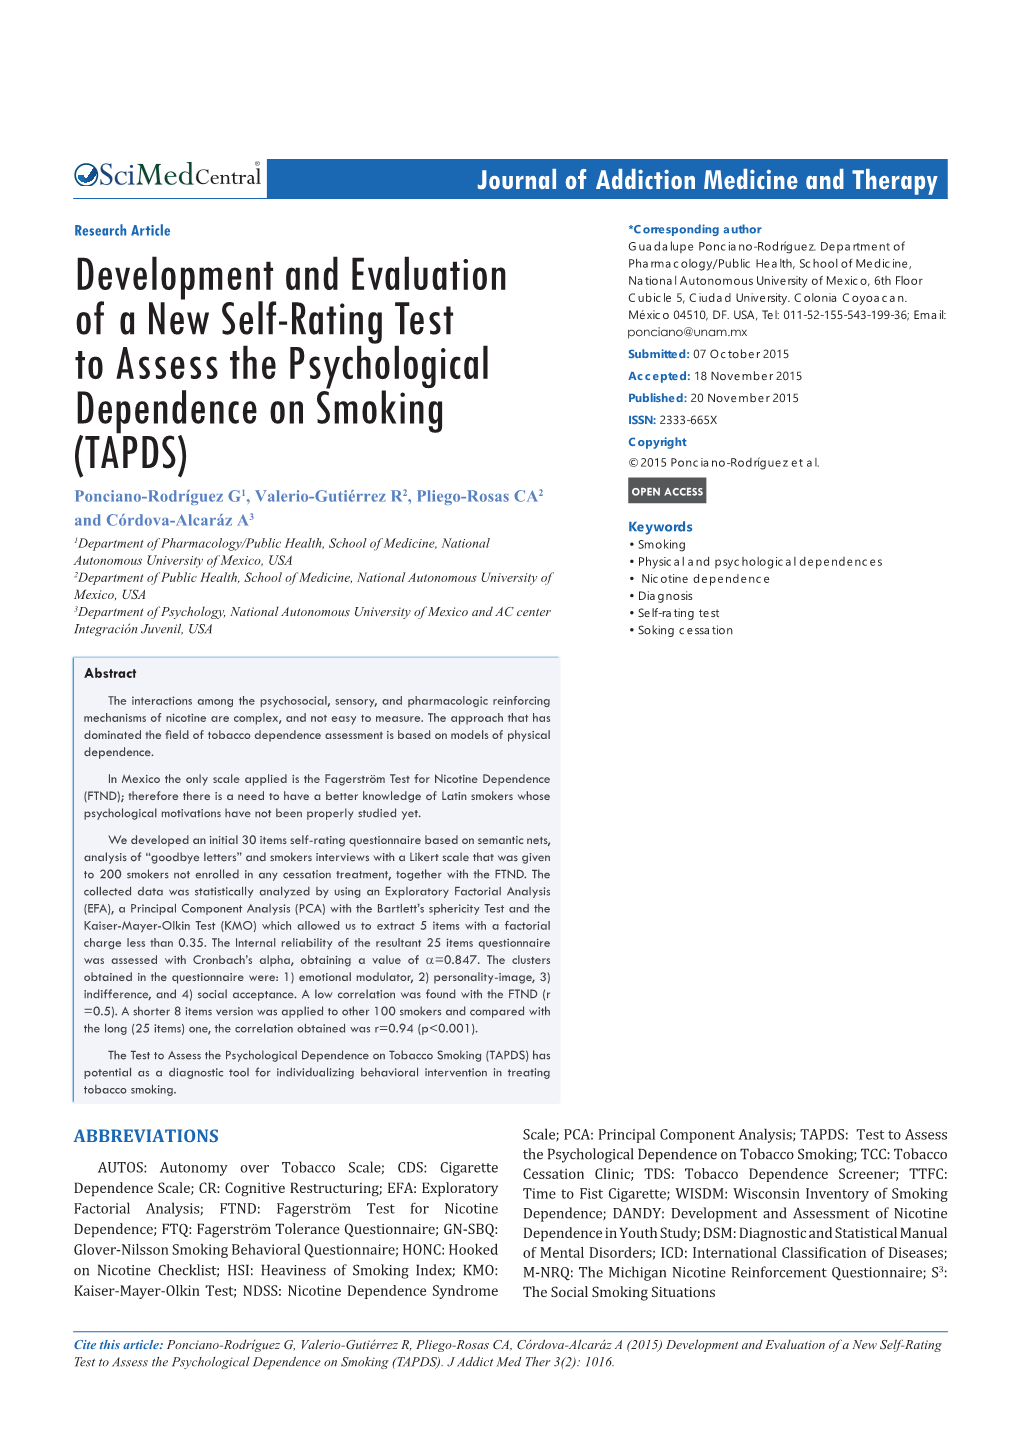 Development and Evaluation of a New Self-Rating Test to Assess the Psychological Dependence on Smoking (TAPDS)